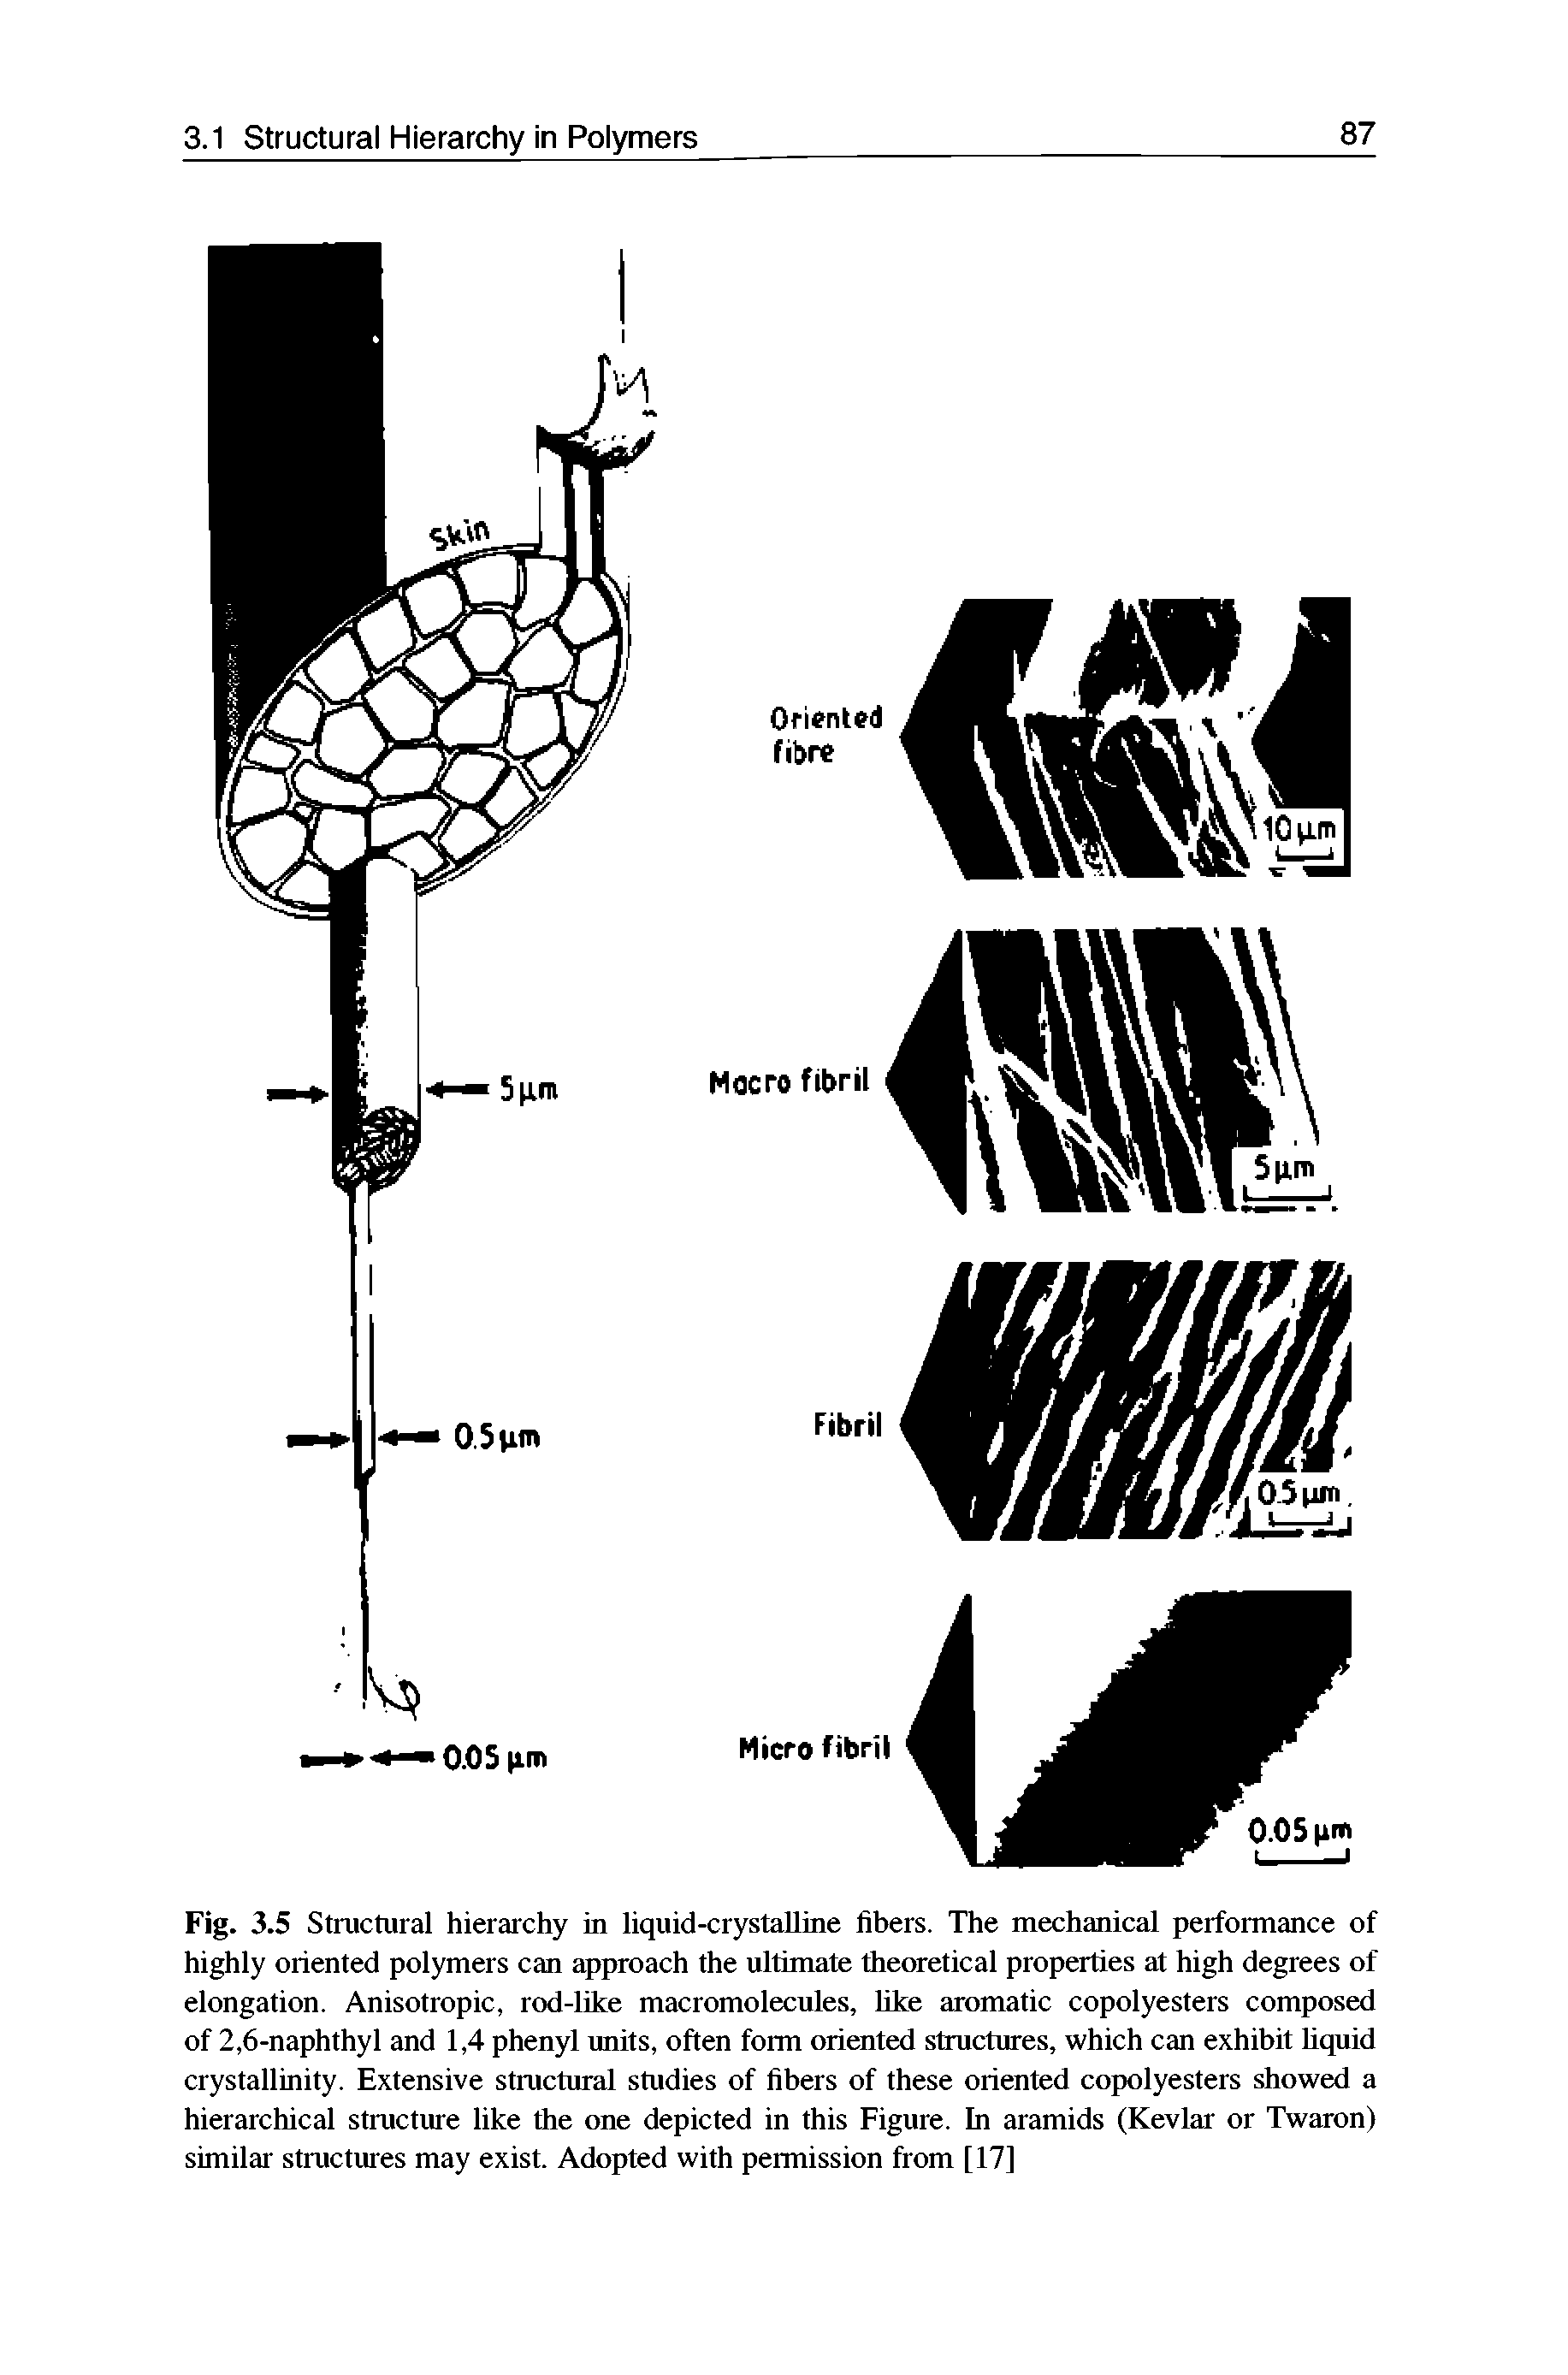 Fig. 3.5 Structural hierarchy in liquid-crystalline fibers. The mechanical performance of highly oriented polymers can approach the ultimate theoretical properties at high degrees of elongation. Anisotropic, rod-like macromolecules, like aromatic copolyesters composed of 2,6-naphthyl and 1,4 phenyl units, often form oriented structures, which can exhibit liquid crystallinity. Extensive structural studies of fibers of these oriented copolyesters showed a hierarchical structure like the one depicted in this Figure. In aramids (Kevlar or Twaron) similar structures may exist. Adopted with permission from [17]...